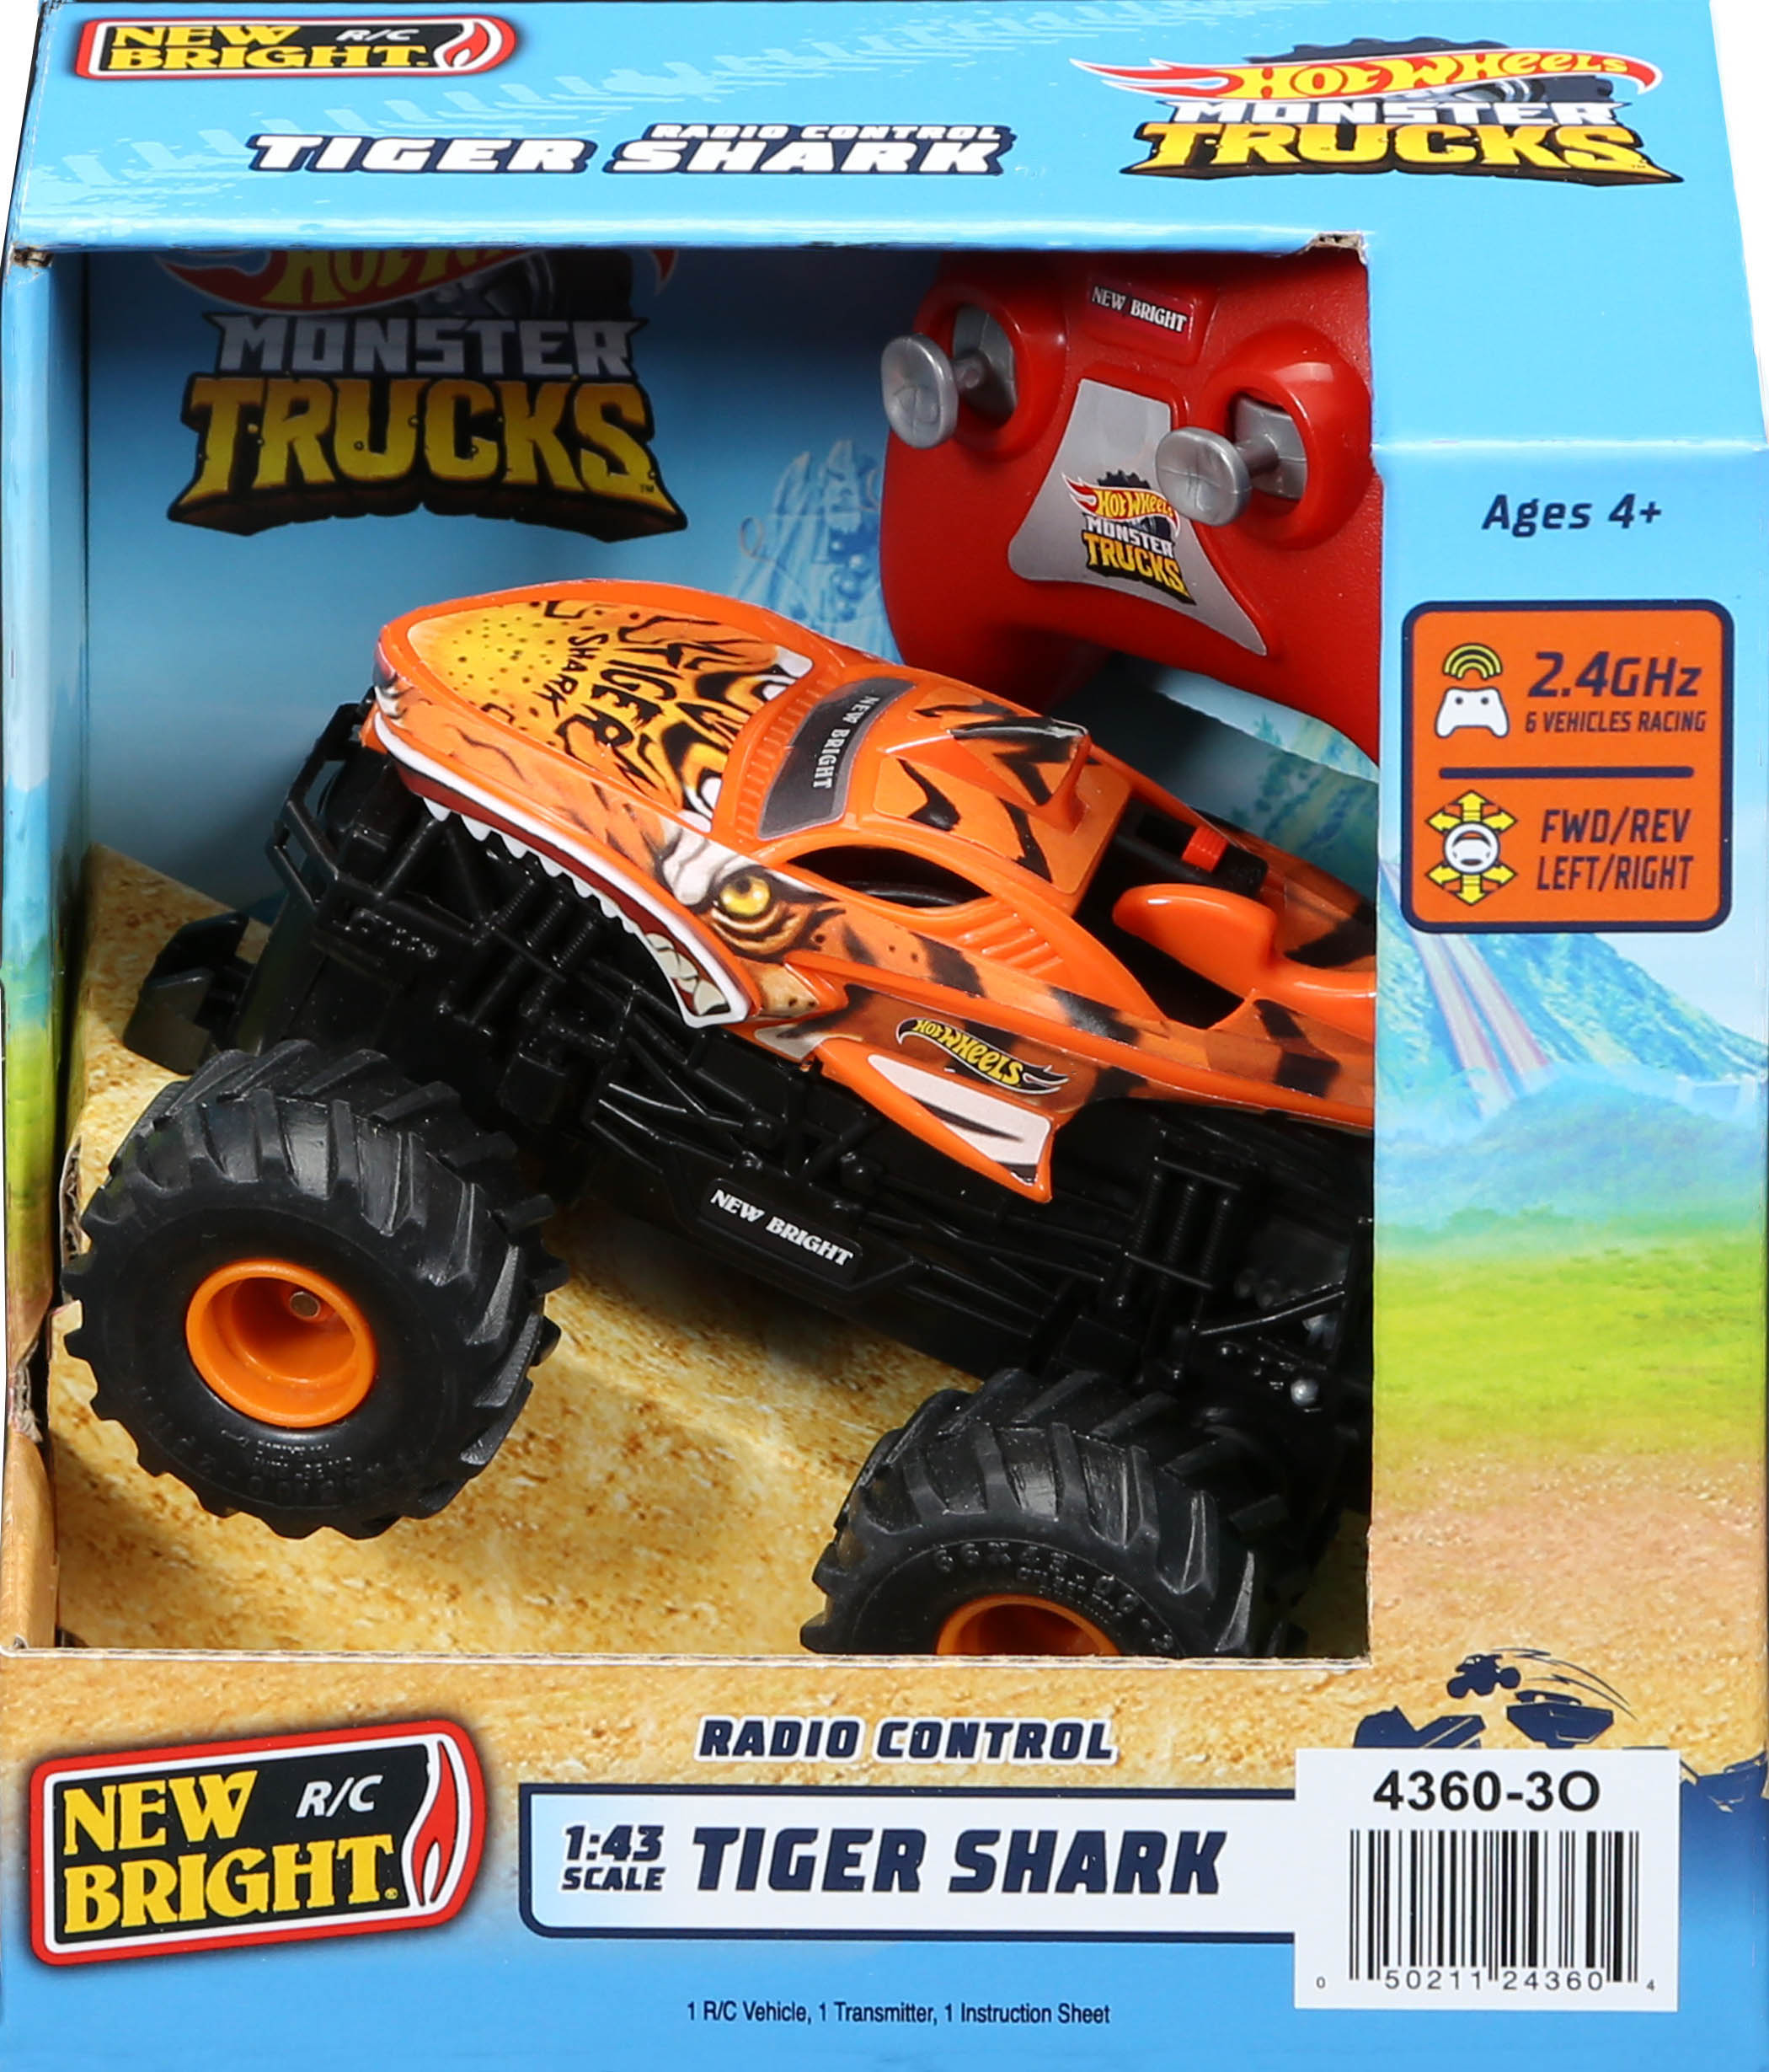 New Bright RC 1:43 Scale Remote Control Hot Wheels Tiger Shark Monster Truck 2.4GHz - image 2 of 8